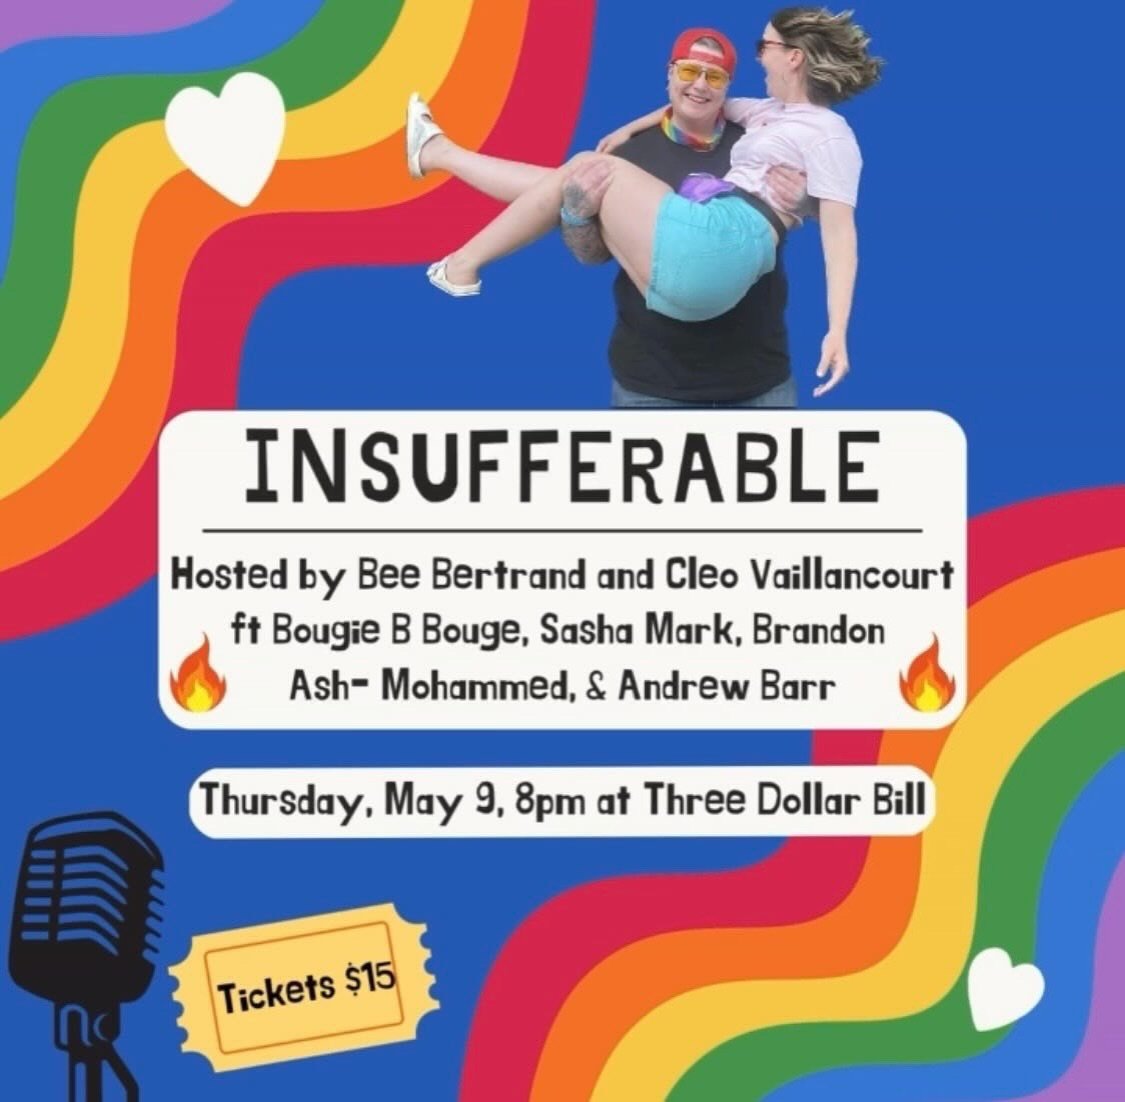 🤩 TONIGHT! 🤩
&ldquo;Insufferable&rdquo; with Bee Bertrand @beebertrandcomedy and Cleo Vaillancourt.

We have been called a lot of things- inspiring, influential, ingenious- but the people who know us best call us Insufferable. Just don&rsquo;t call